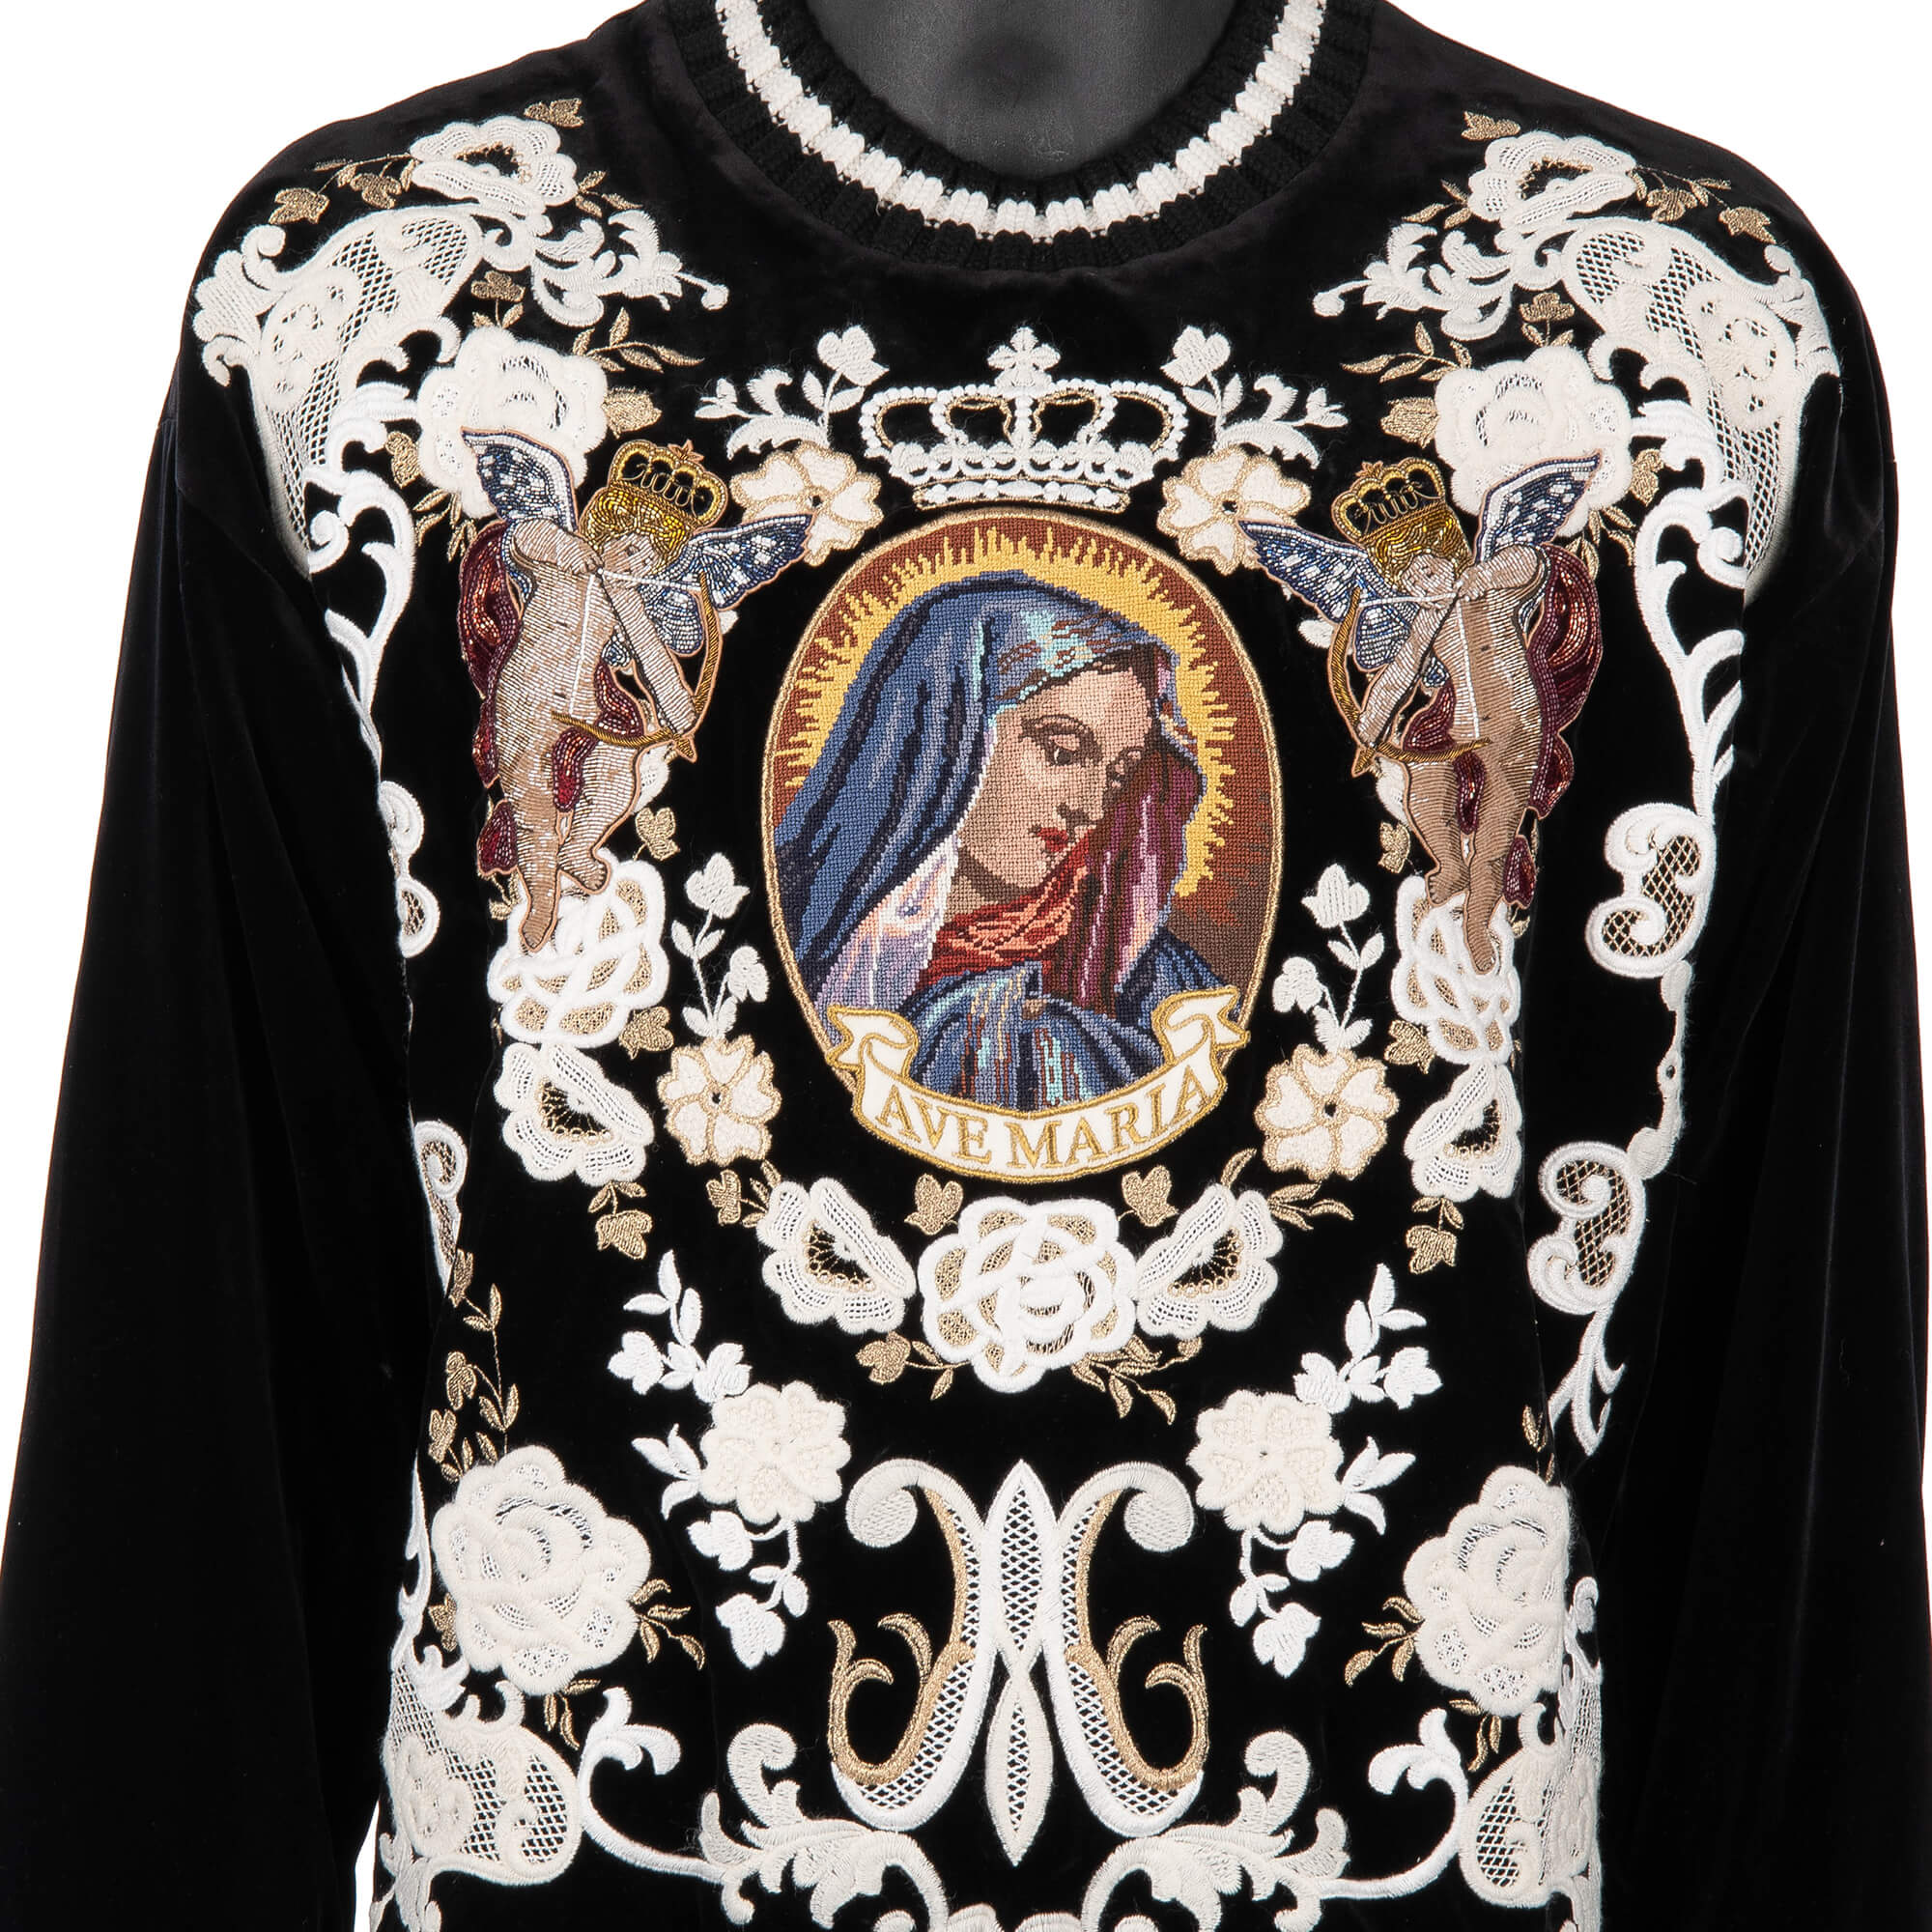 Velvet-Sweater-with-Angels-and-Santa-Maria-Embroidery-Black-White-2.jpg